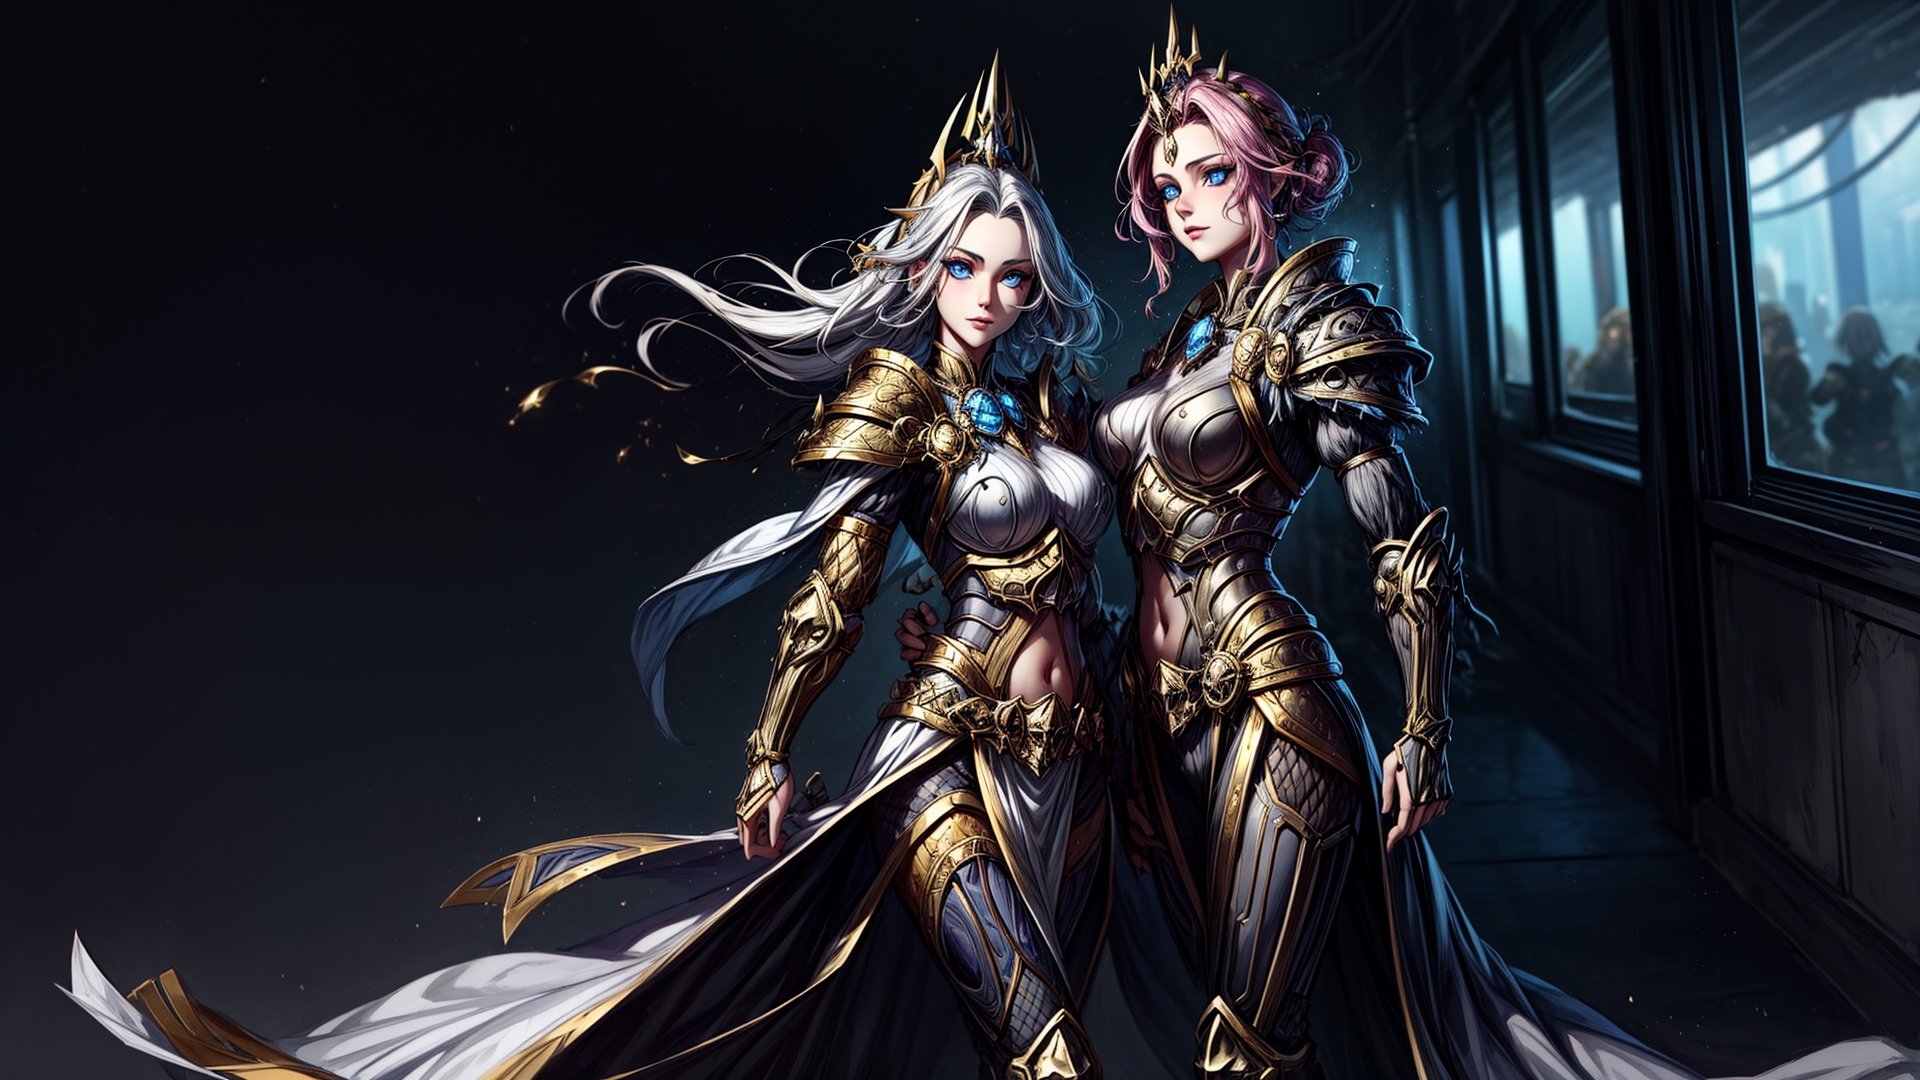 2 girl
random hair 
standing side by side
golden armor
wearing armor  ,Young beauty spirit ,wowdk,photorealistic